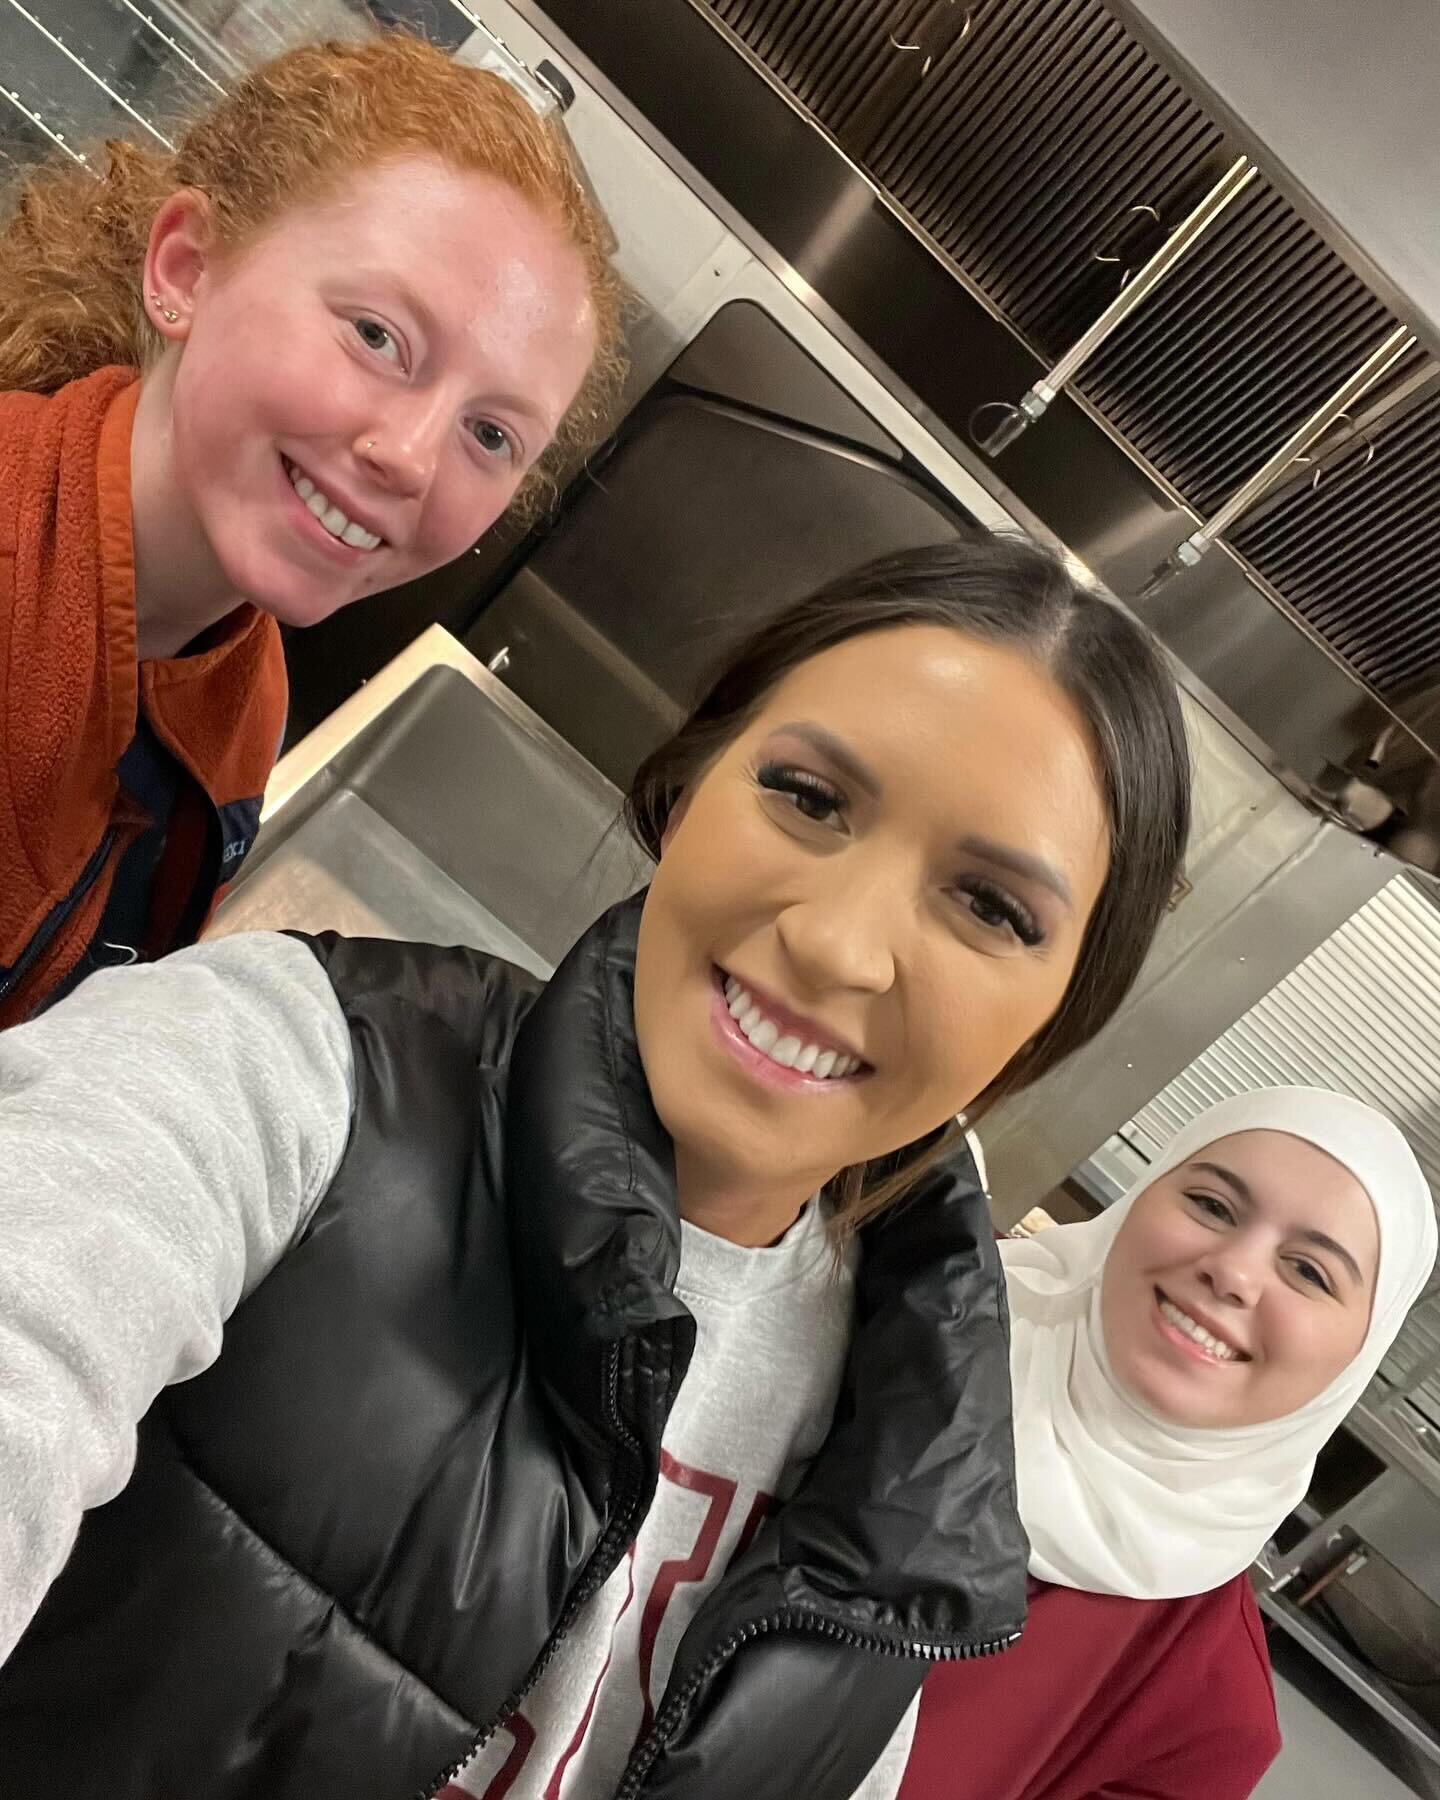 ⭐️Recovery on Redwood⭐️

Volunteers helped prepare and serve meals for those in the community going through detoxification and recovery! 

#dentalstudents #asda #dentists #futuredentists #roseman #utah #dentalschool #teeth #dentistry #district10